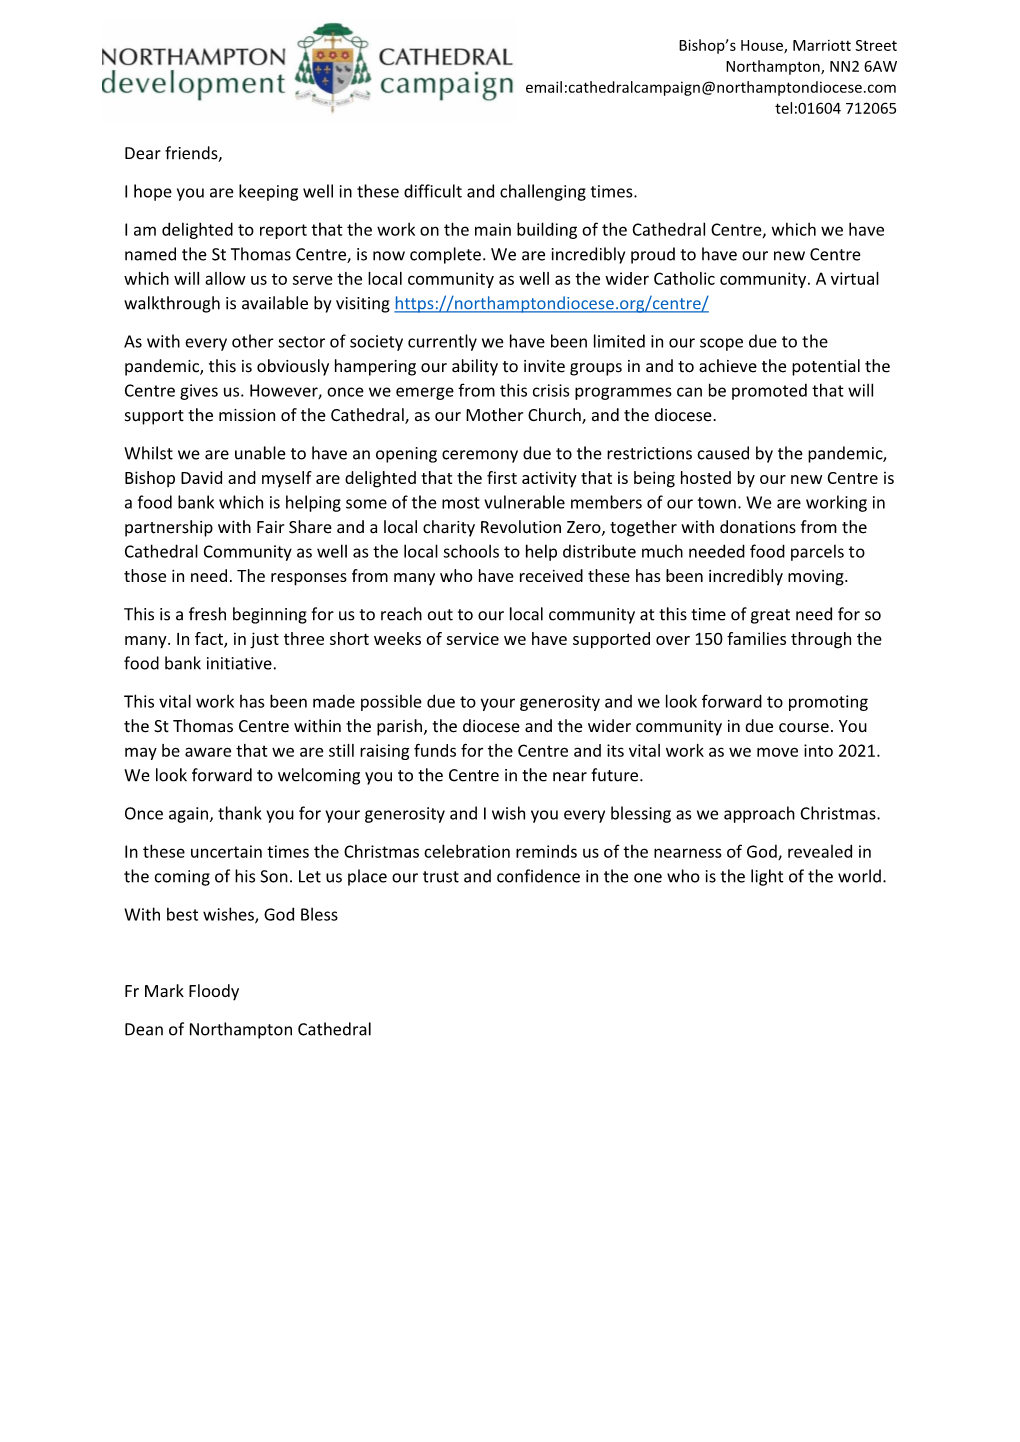 Northampton Cathedral Campaign Letter